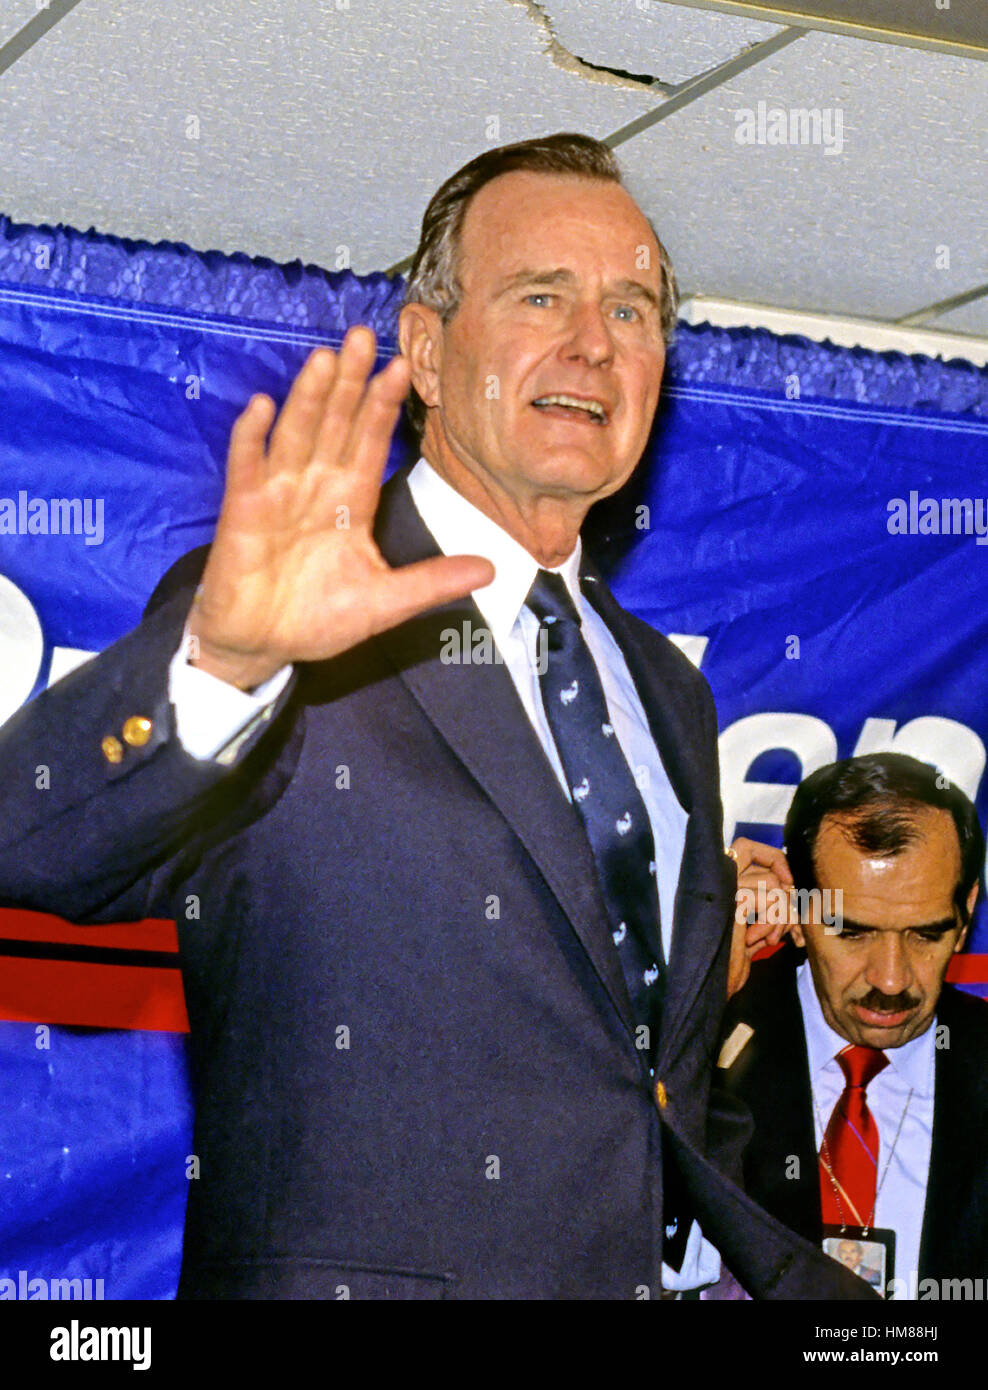 United States Vice President George H.W. Bush congratulates his campaign headquarters staff in Washington, D.C. following their victory in the New Hampshire Primary on February 17, 1988. Bush campaign manager Lee Atwater looks on from the far right of the Stock Photo